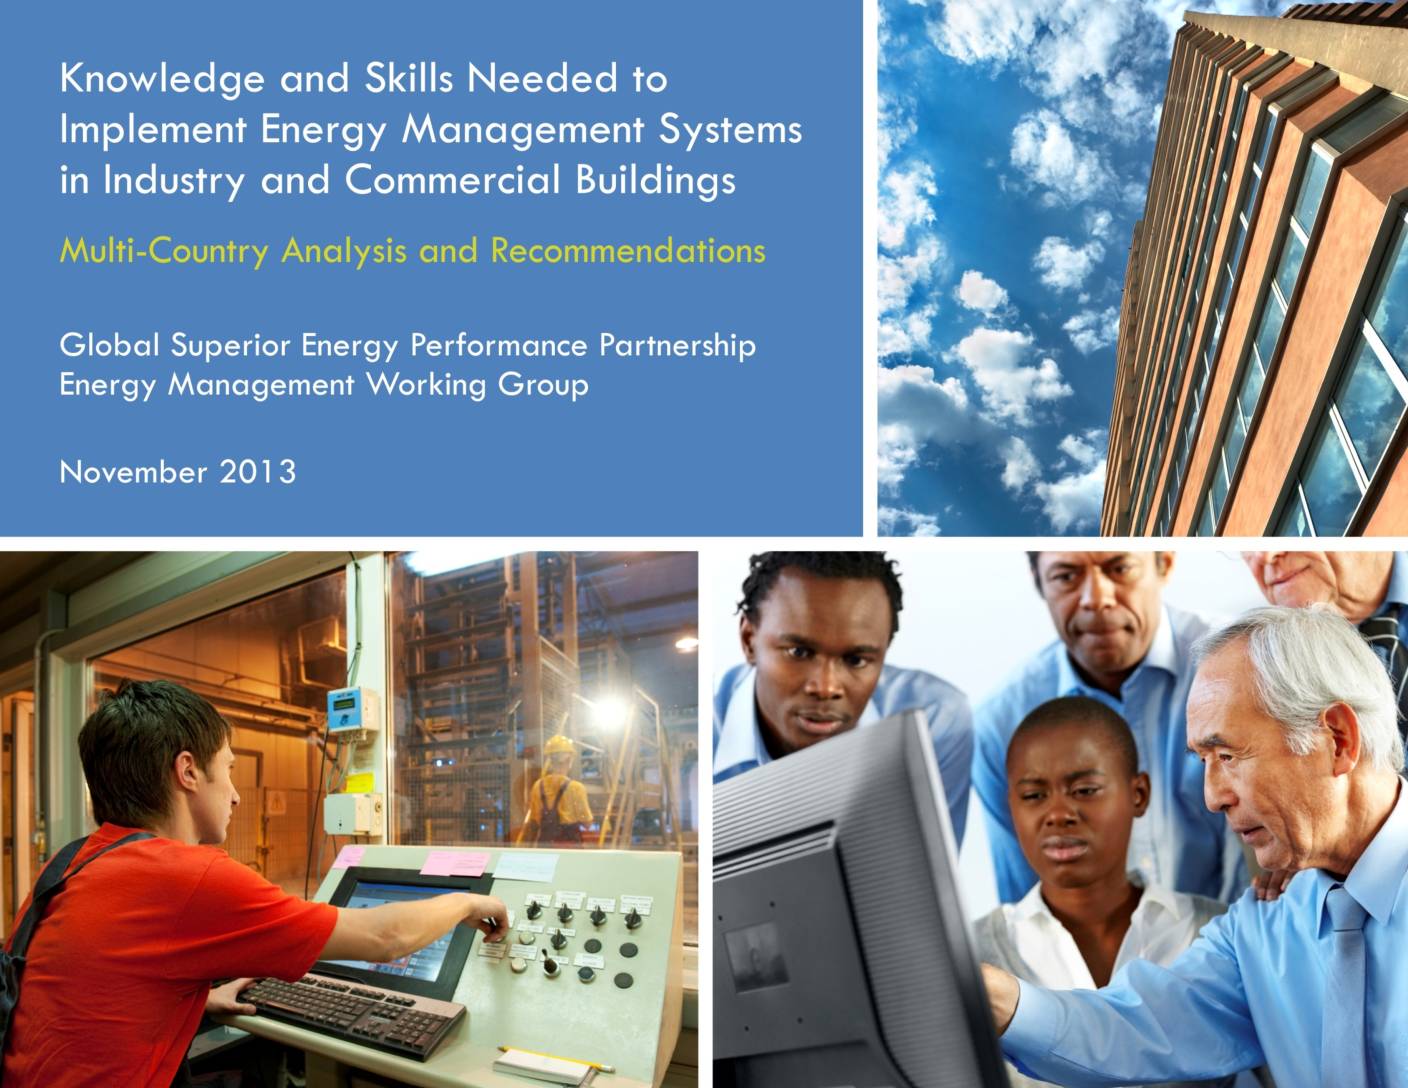 Knowledge and Skills Needed to Implement Energy Management Systems in Industry and Commercial Buildings